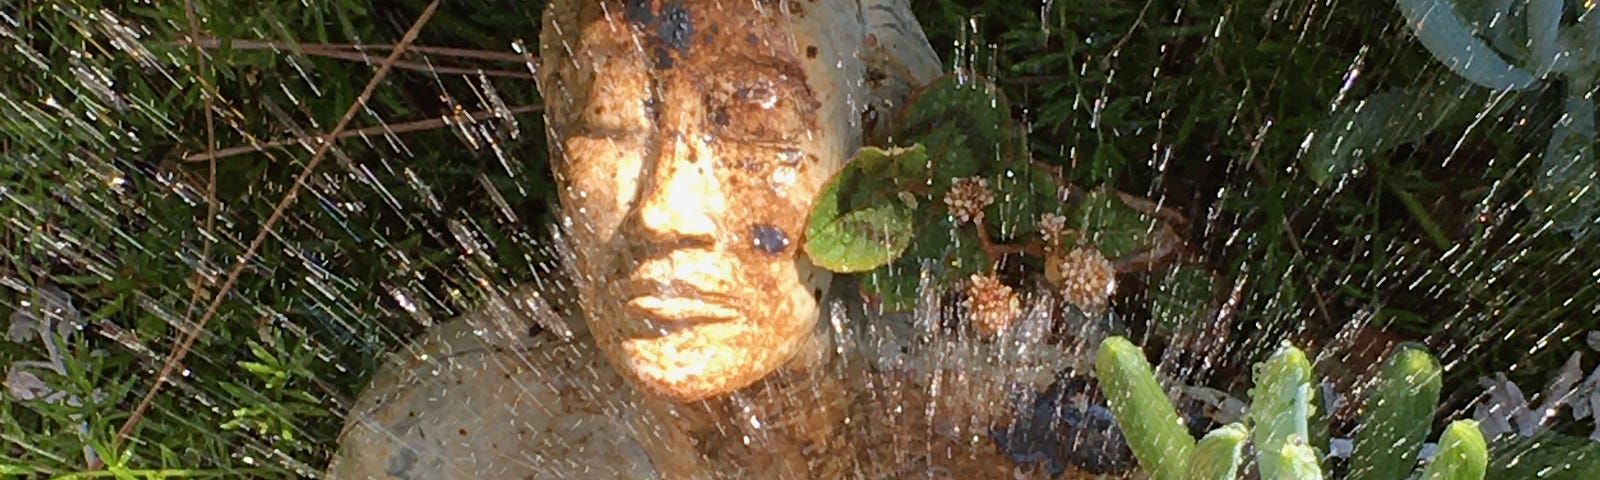 Sculpture of woma with hands reaching across chest together, eyes closed, sprinkler sprinkling water ovr her. She sits by cactus and lants.